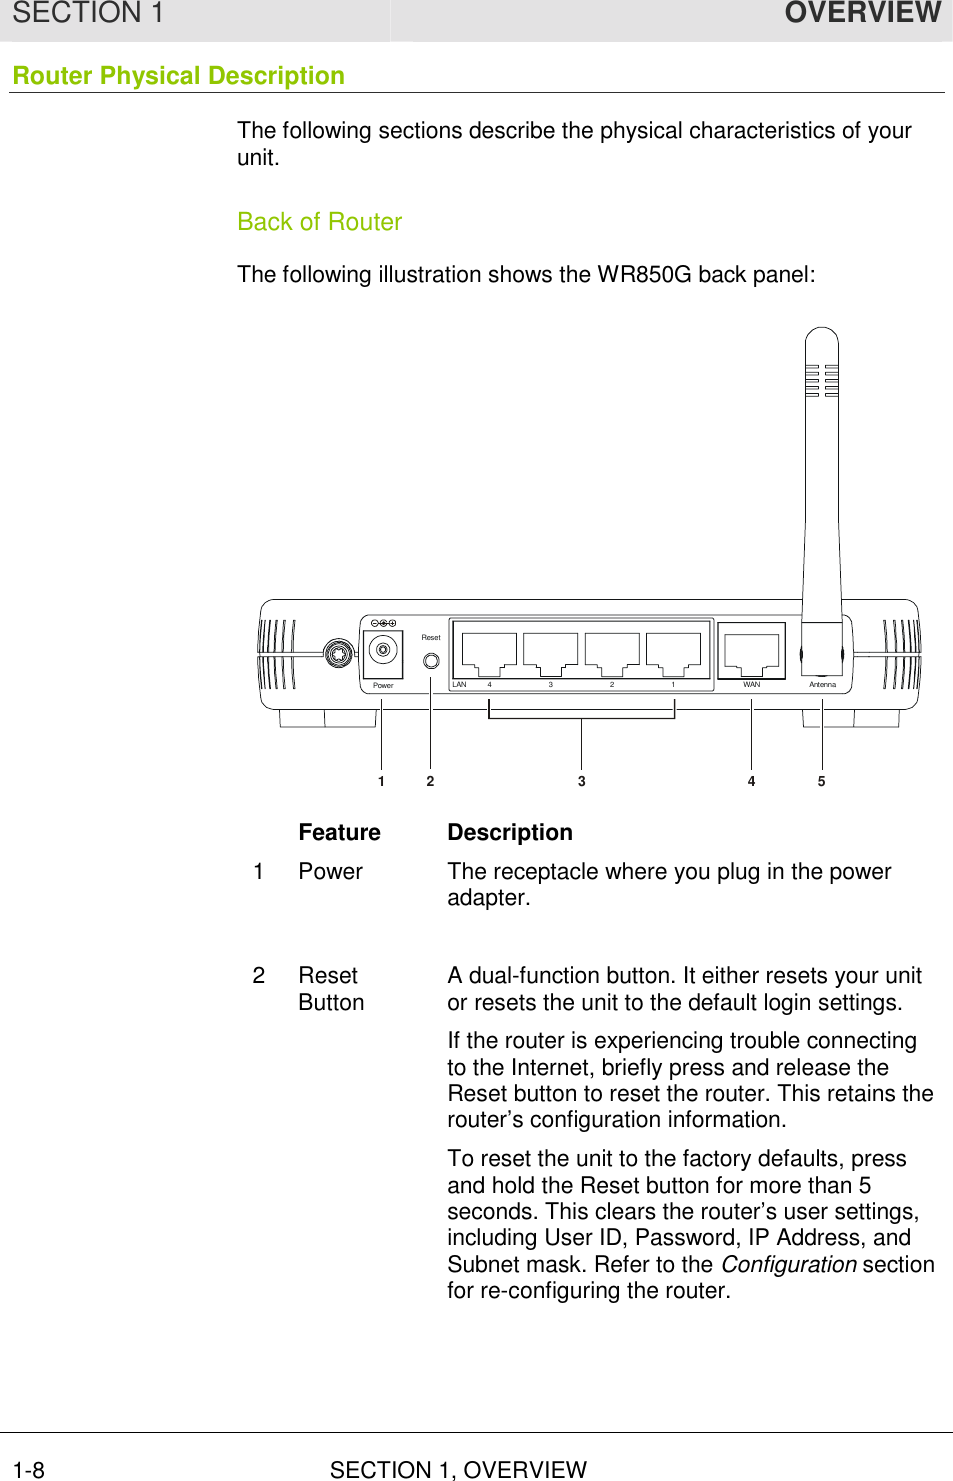 SECTION 1  OVERVIEW 1-8 SECTION 1, OVERVIEW  Router Physical Description The following sections describe the physical characteristics of your unit. Back of Router The following illustration shows the WR850G back panel: 12 3 4 5ResetPower LAN 4 WAN321Antenna  Feature  Description 1  Power  The receptacle where you plug in the power adapter.  2 Reset Button  A dual-function button. It either resets your unit or resets the unit to the default login settings.  If the router is experiencing trouble connecting to the Internet, briefly press and release the Reset button to reset the router. This retains the router’s configuration information. To reset the unit to the factory defaults, press and hold the Reset button for more than 5 seconds. This clears the router’s user settings, including User ID, Password, IP Address, and Subnet mask. Refer to the Configuration section for re-configuring the router.  